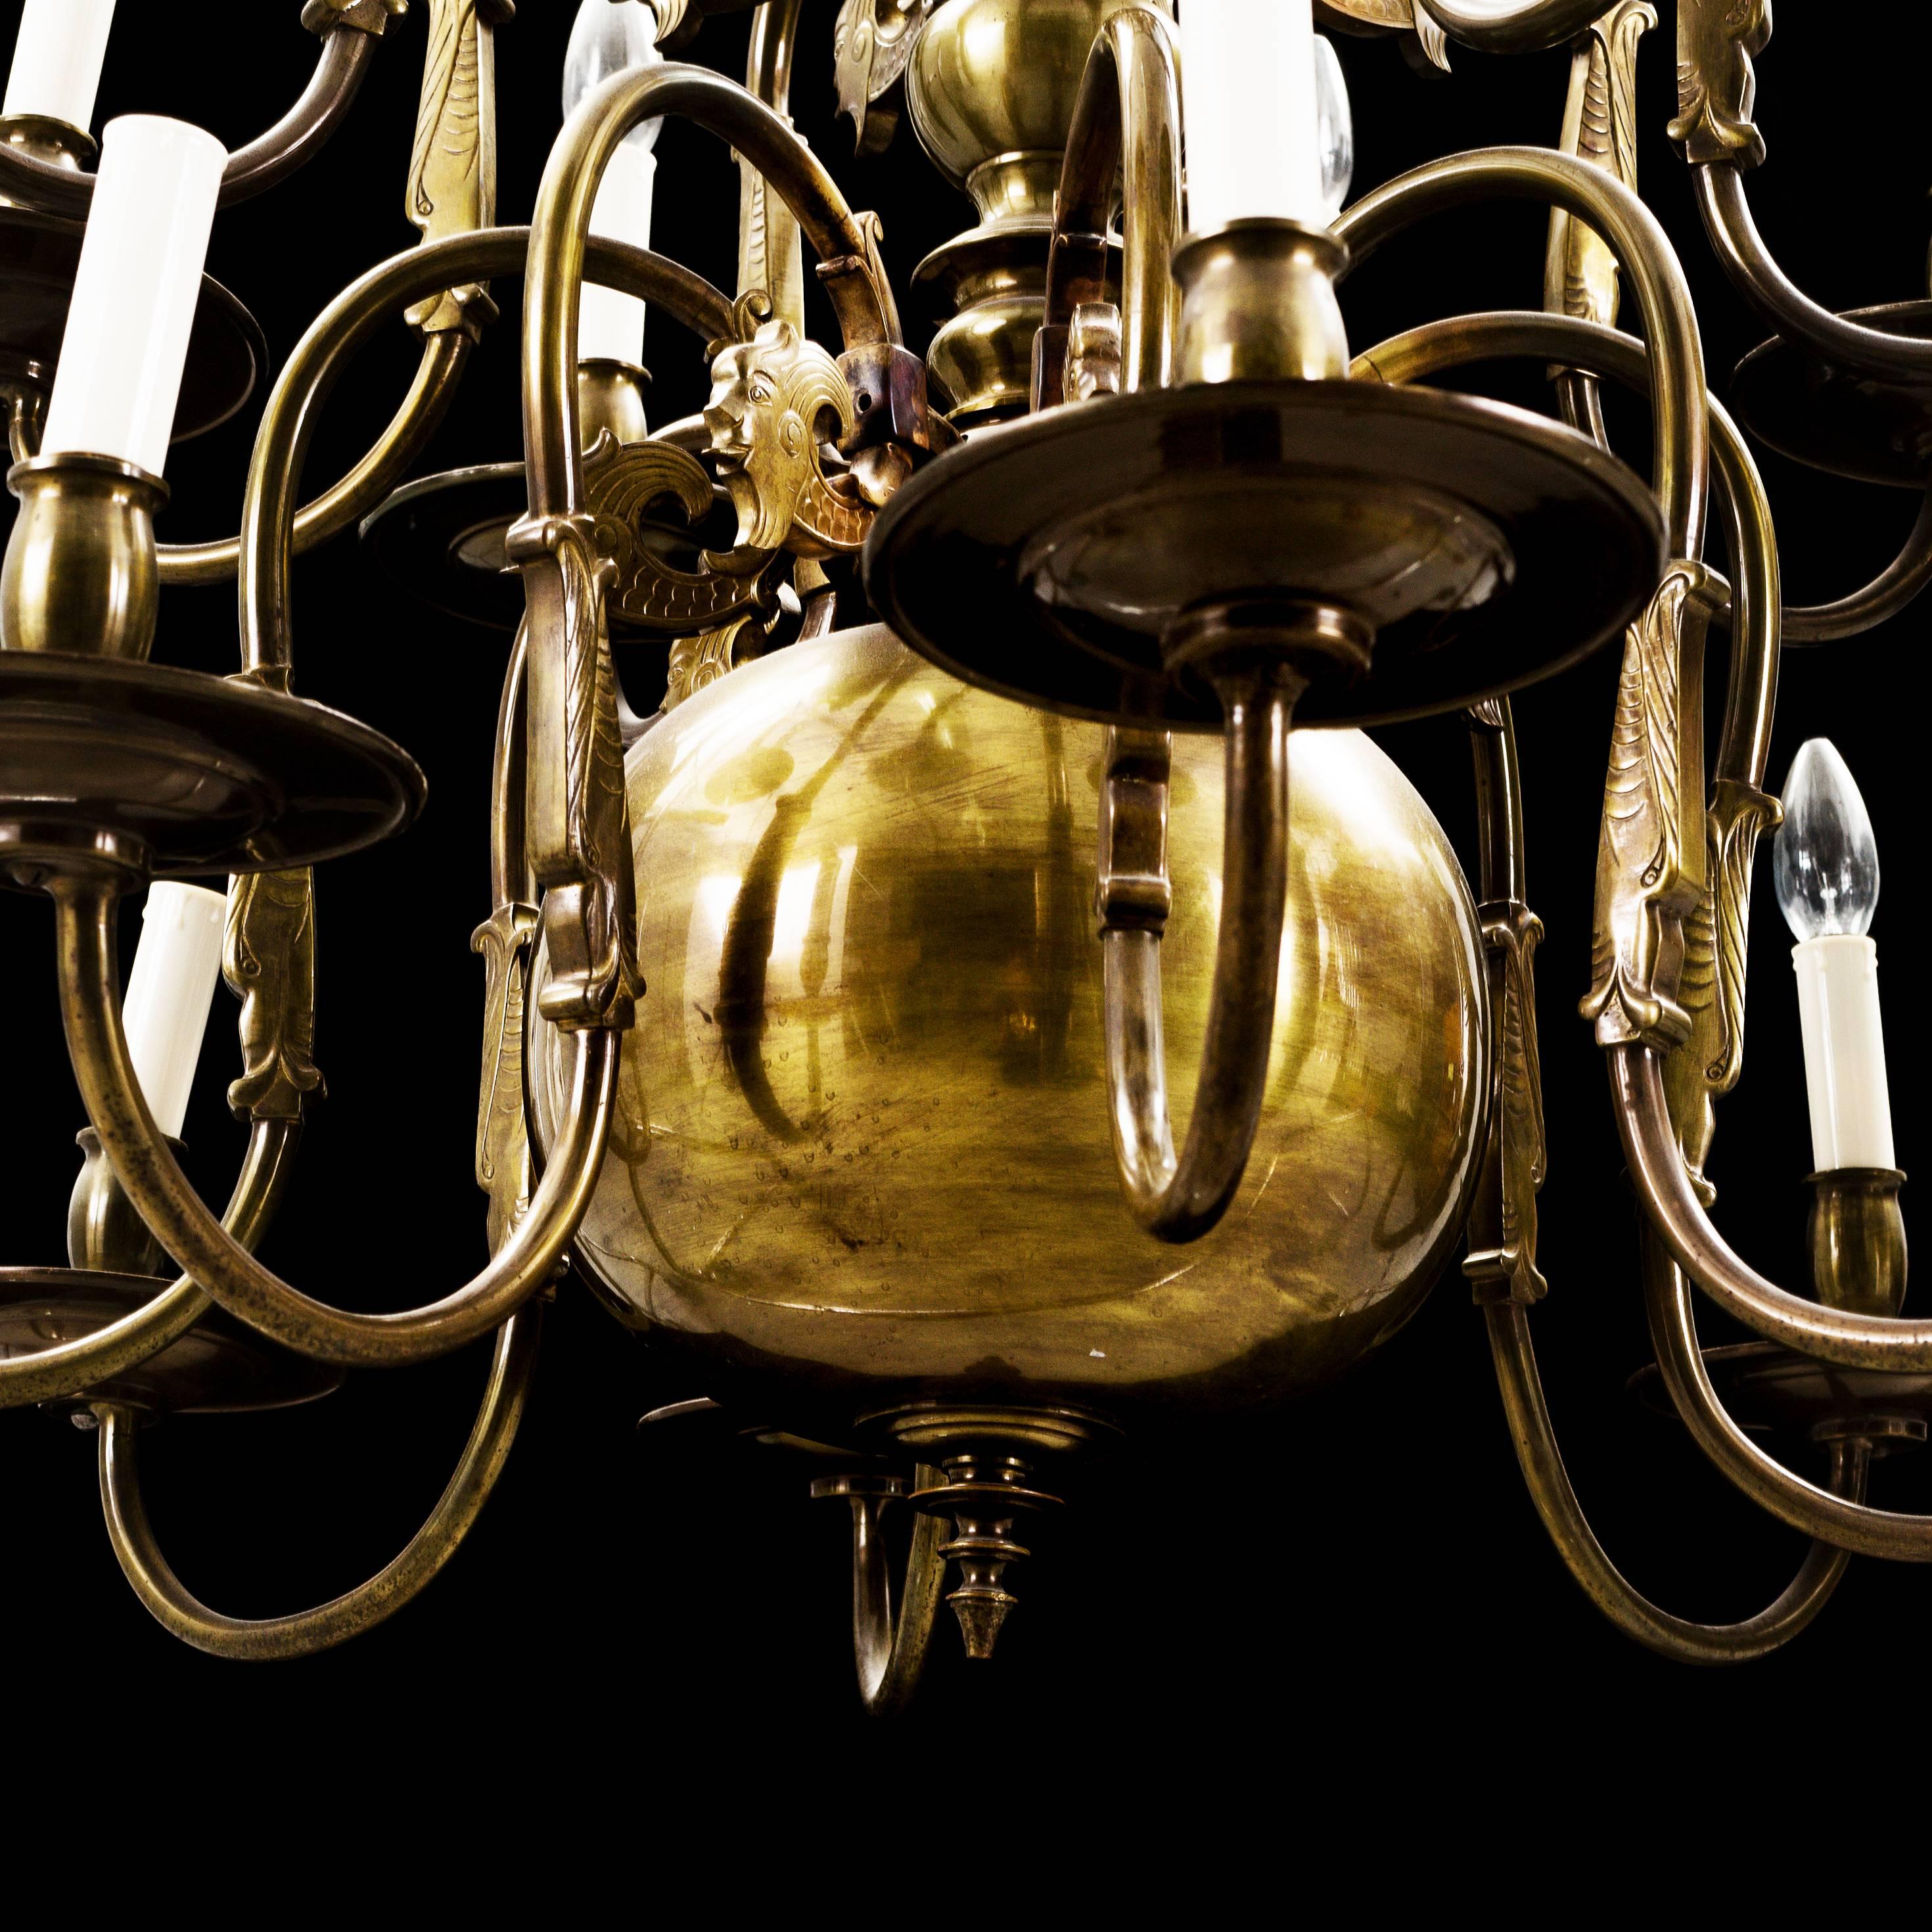 An 20th-century Dutch baroque chandelier in the 17th-century style.
This chandelier has grotesques to the fish-neck branches, surmounted by a double-headed eagle the symbol of the Habsburg Empire, which ruled the Spanish Netherlands, 1581 to